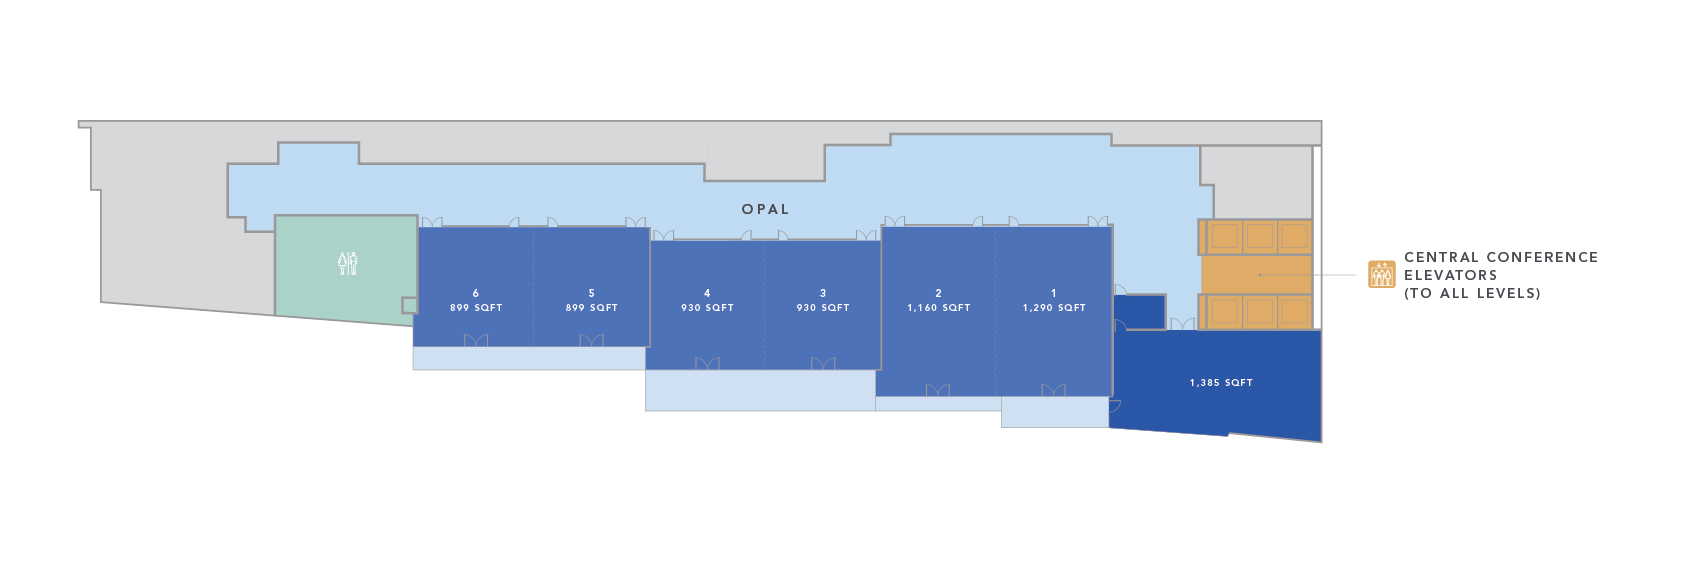 grey and light and dark blue colors used in this floorplan